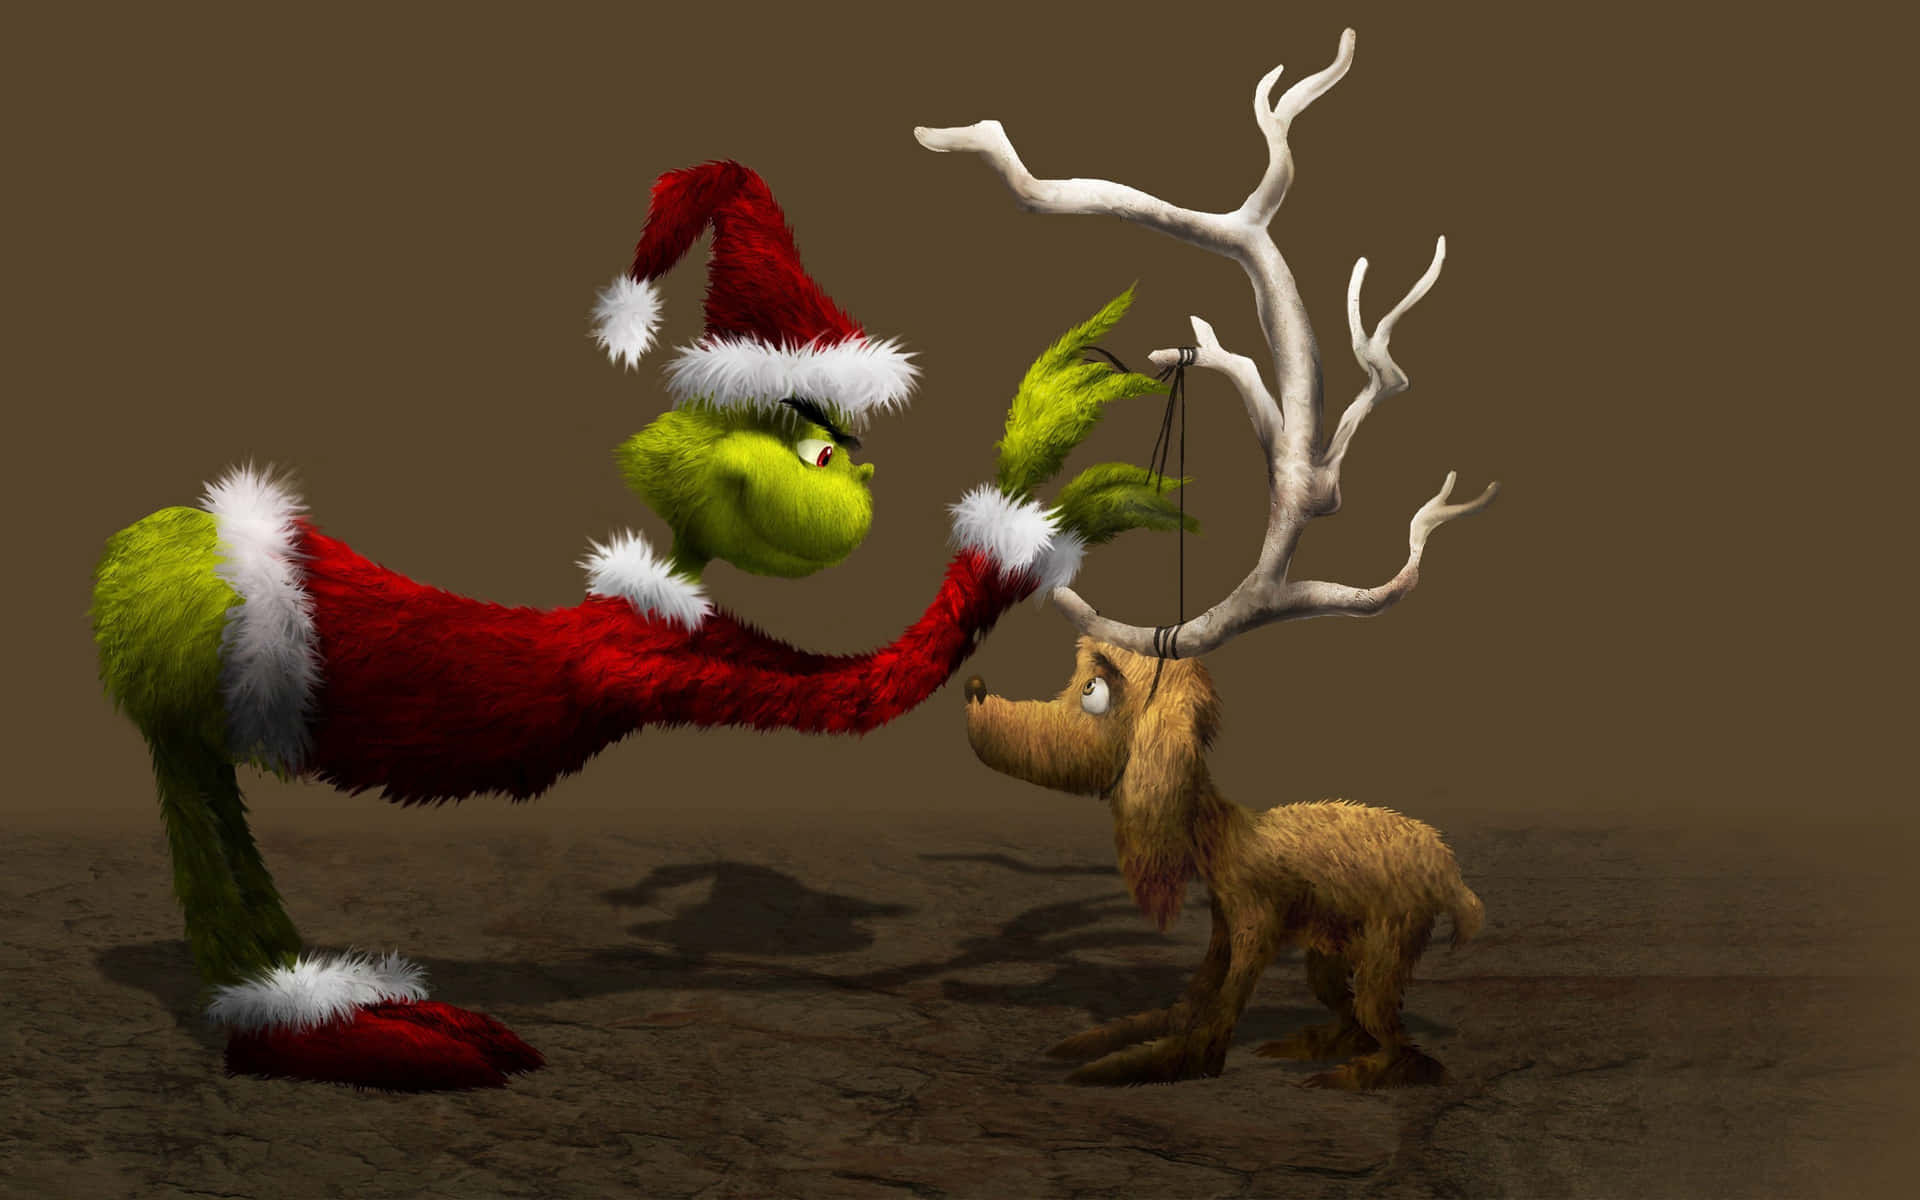 The Grinch Is Ready To Spread Christmas Cheer This Year!